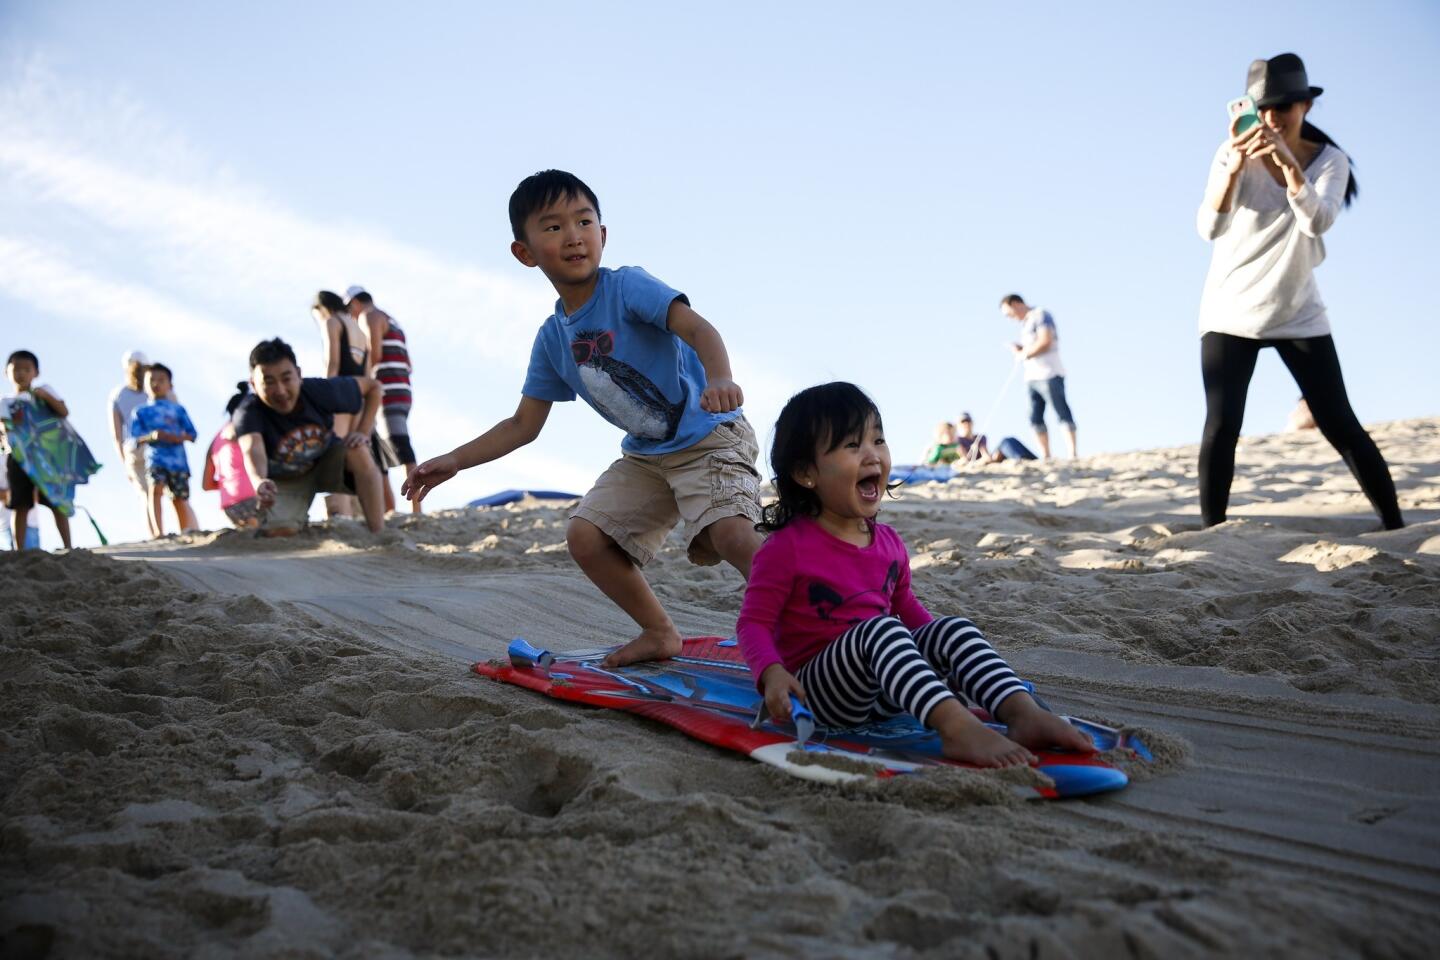 While their mom Jina takes pictures, Eden Inn, 2, of Redondo Beach lets out a scream, as brother Nathan, 5, rides their sled down a sand dune at the Hermosa Beach Pier on Christmas afternoon. The temperature reached the 80s in Hermosa Beach.